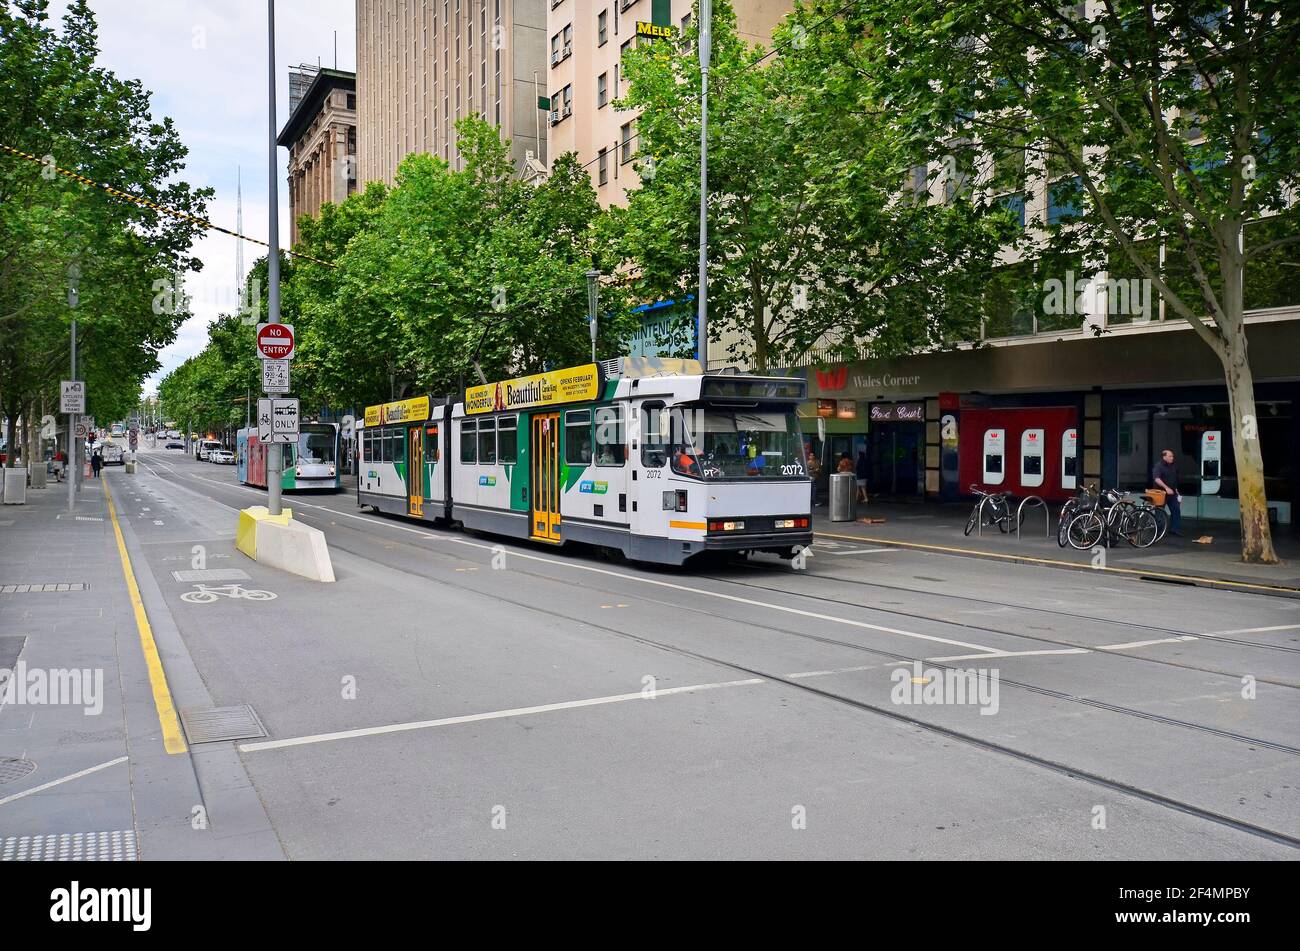 Melbourne, VIC, Australia - November 05, 2017: Unidentified people, shops and public tramway in Swanston Street Stock Photo